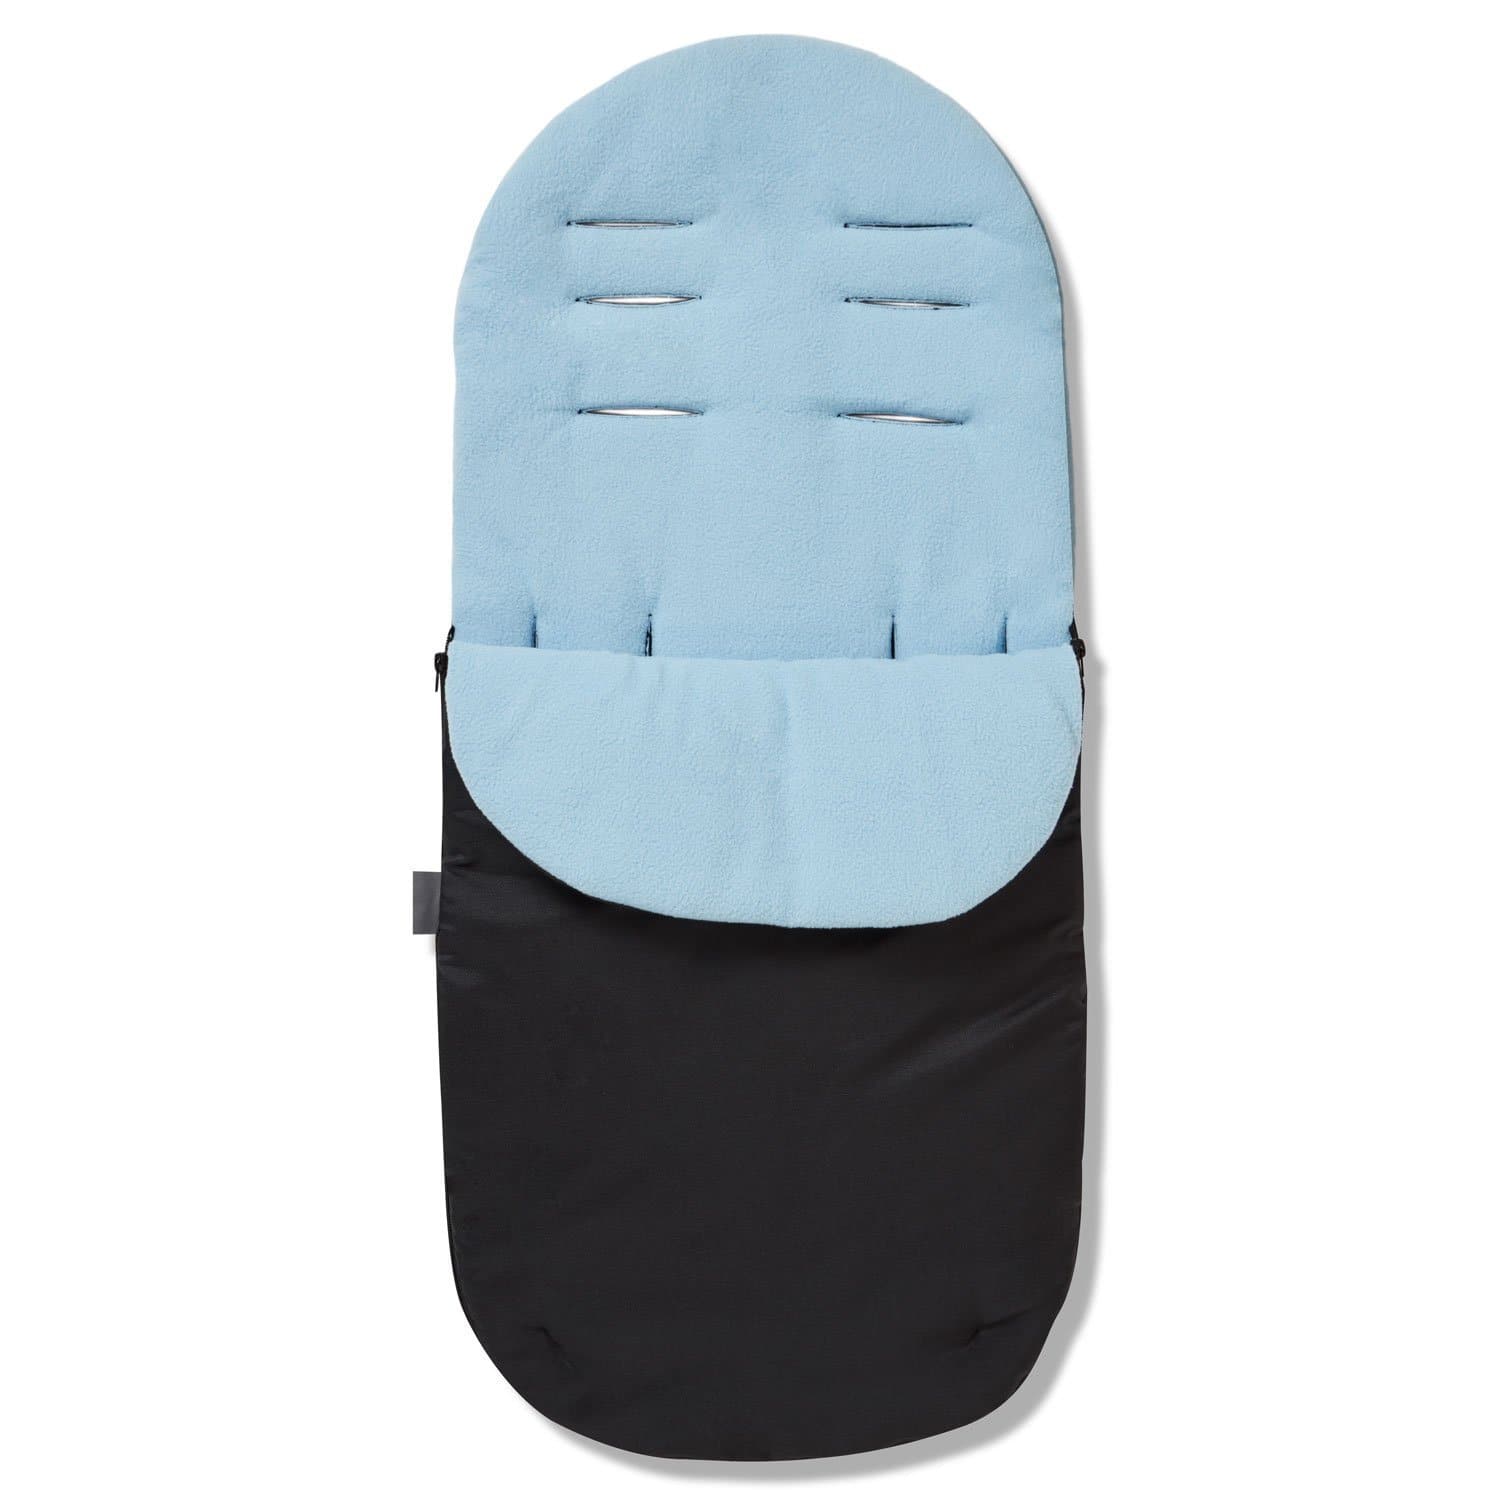 Footmuff / Cosy Toes Compatible with Valco - Light Blue / Fits All Models | For Your Little One